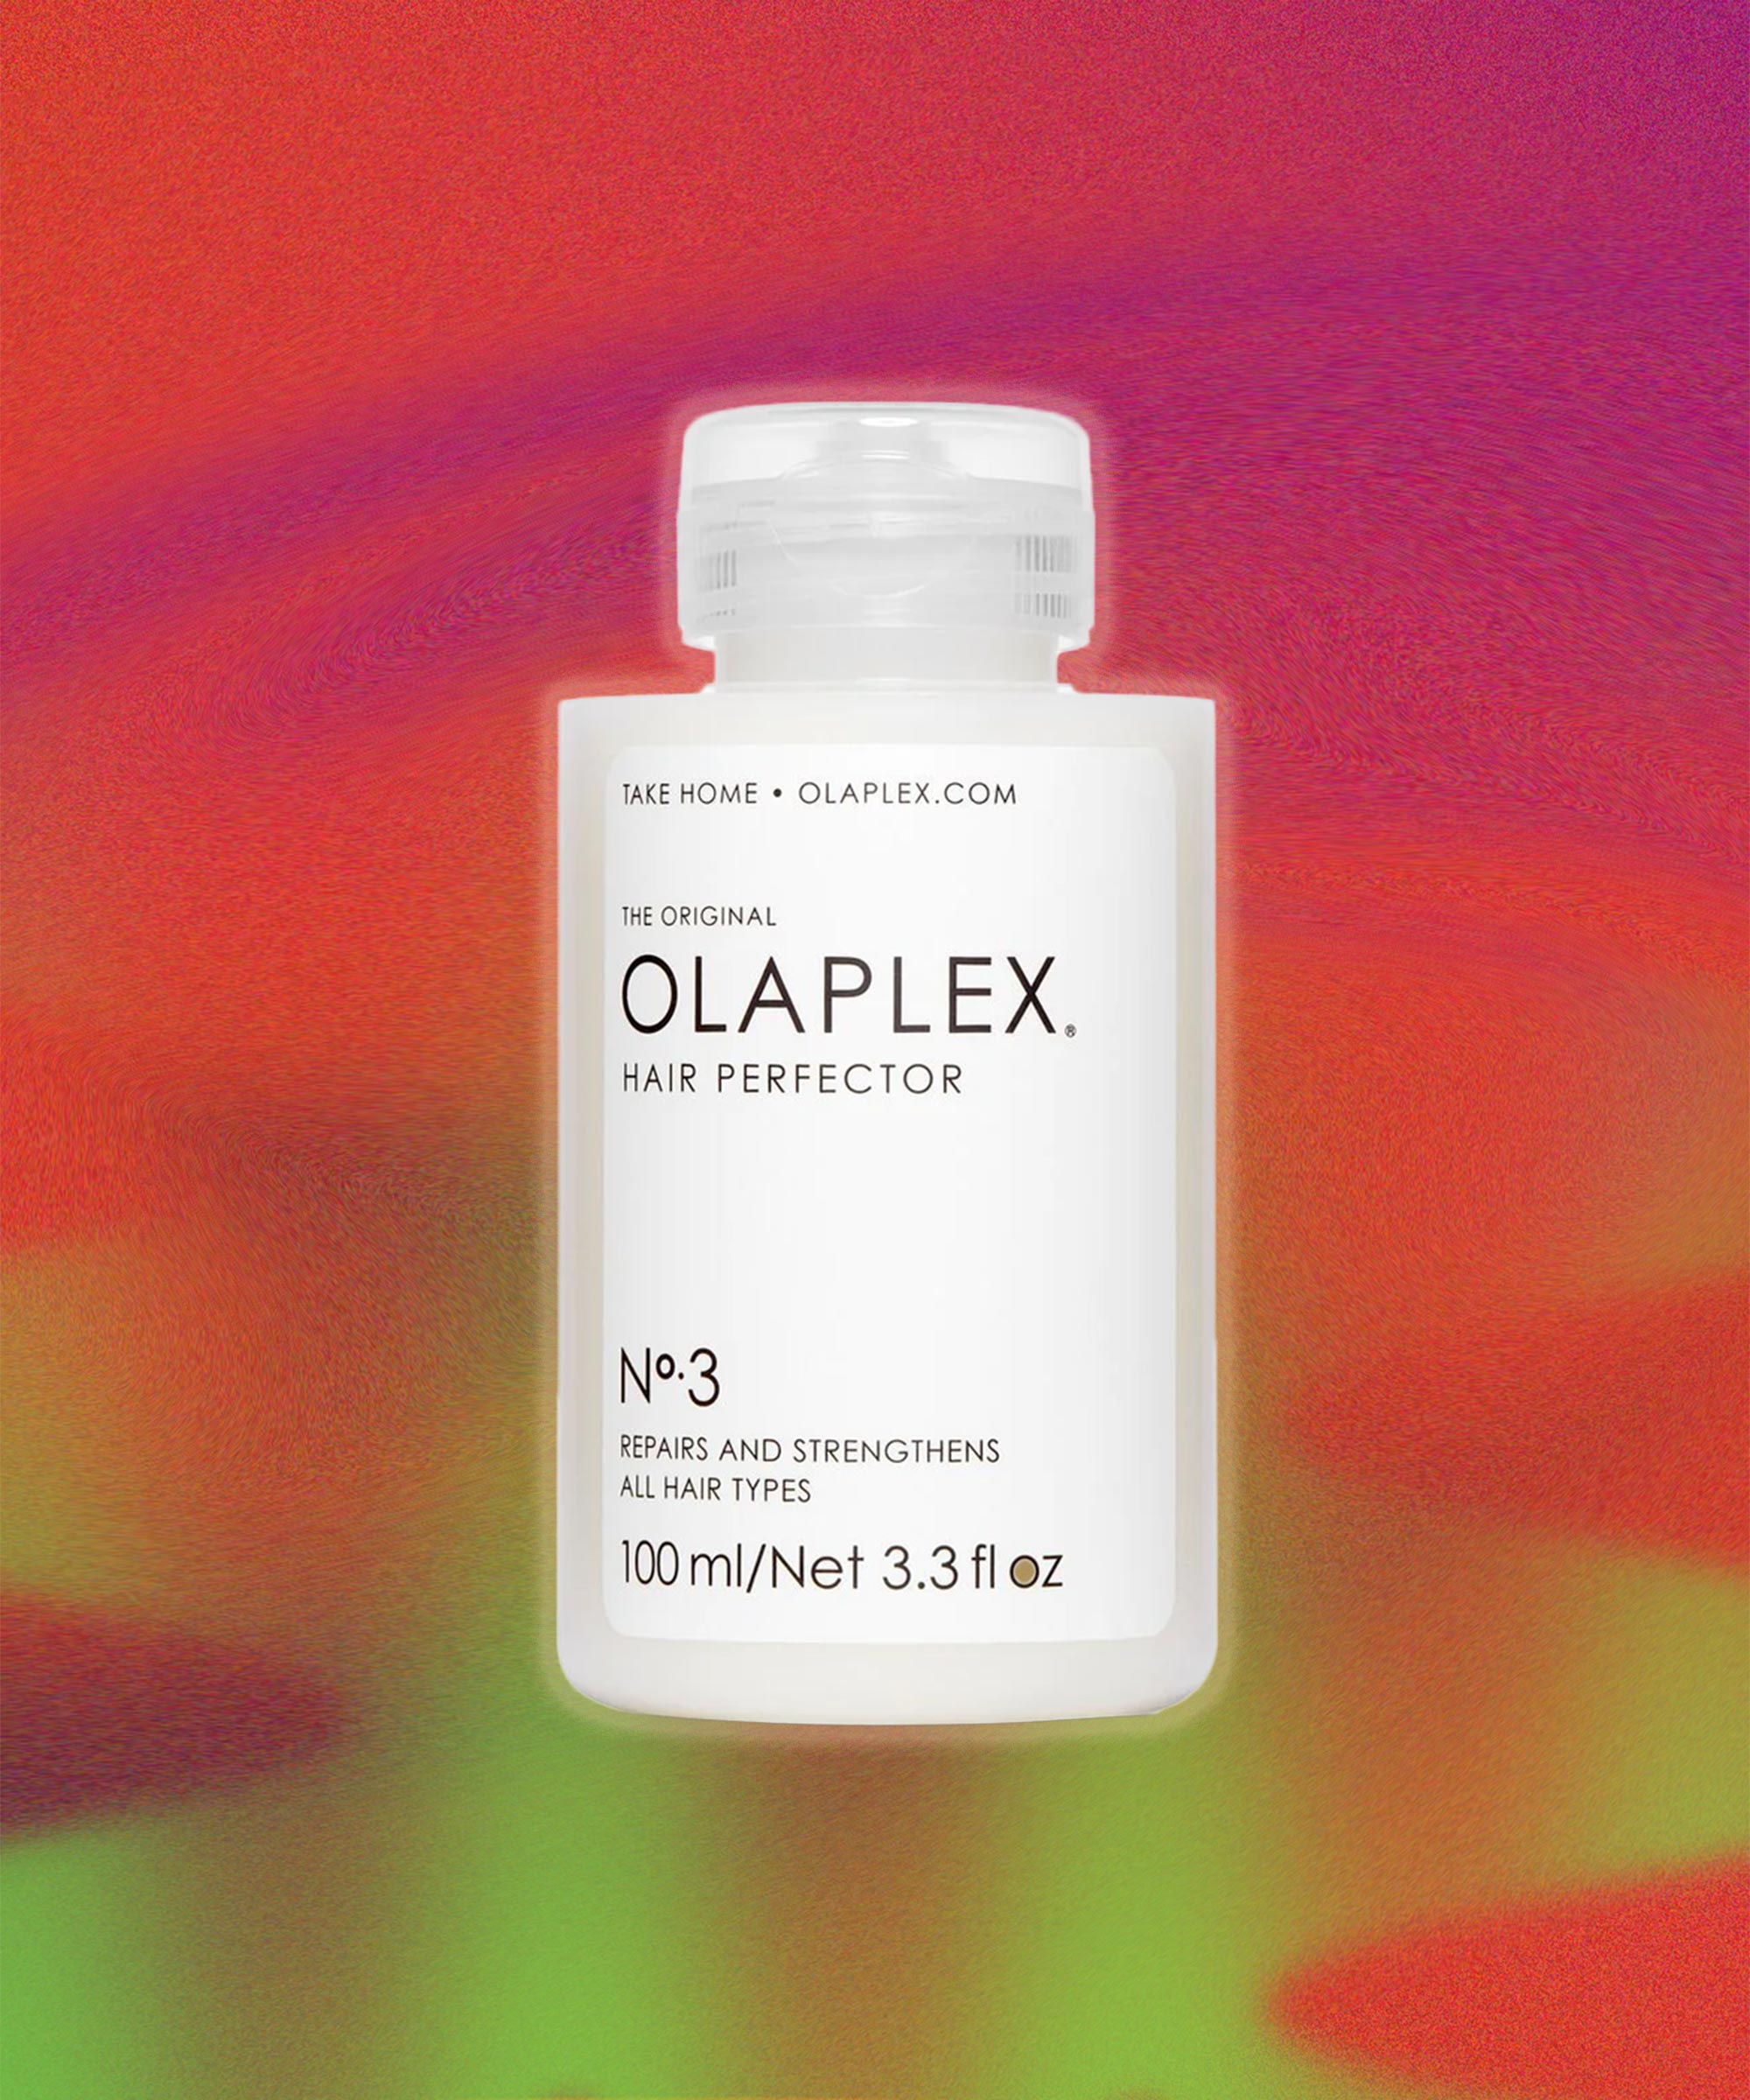 Does Olaplex Cause Hair Loss? The Lawsuit Drama Decoded